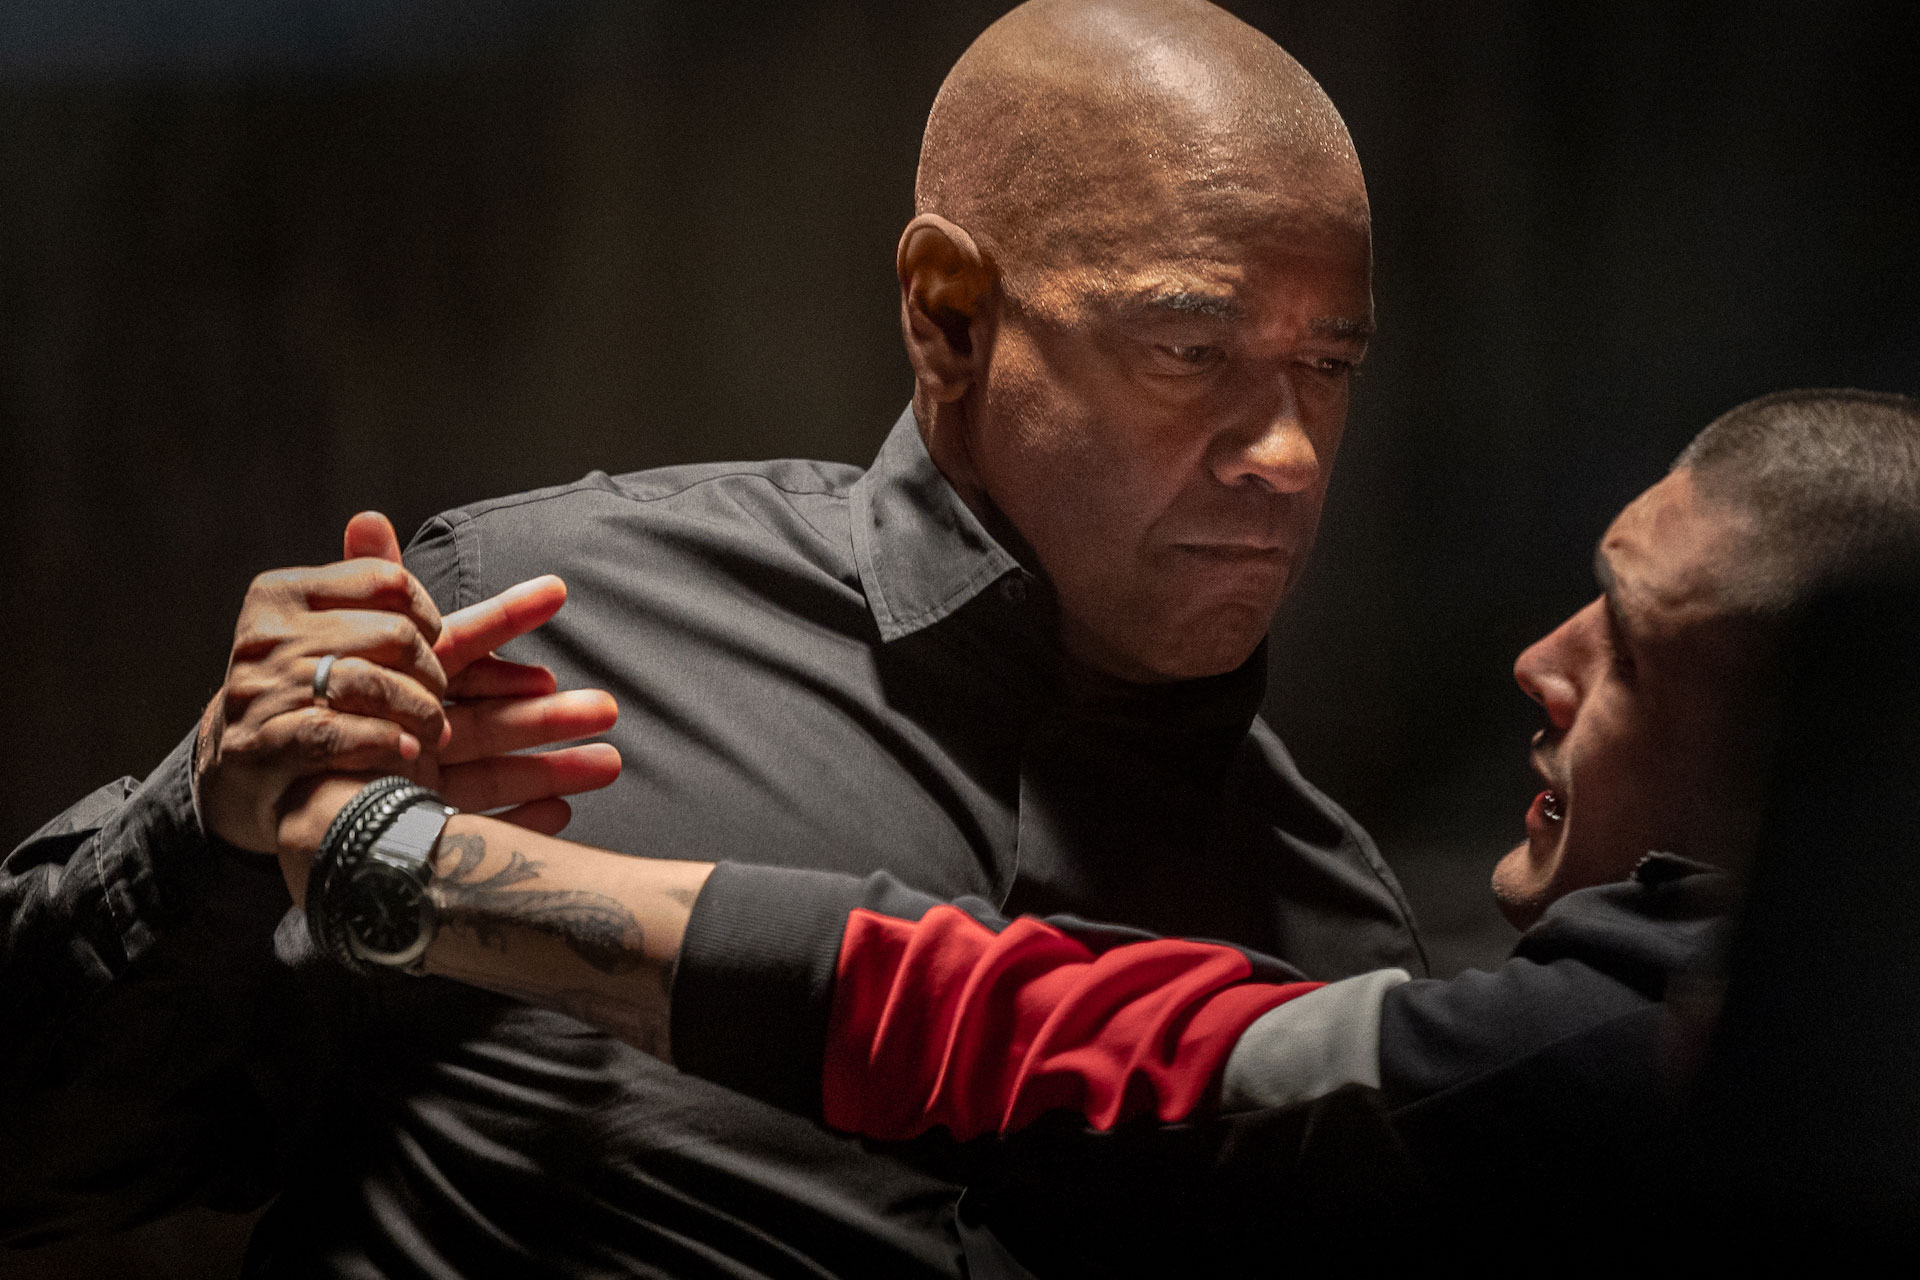 EQUALIZER 3 – THE FINAL CHAPTER